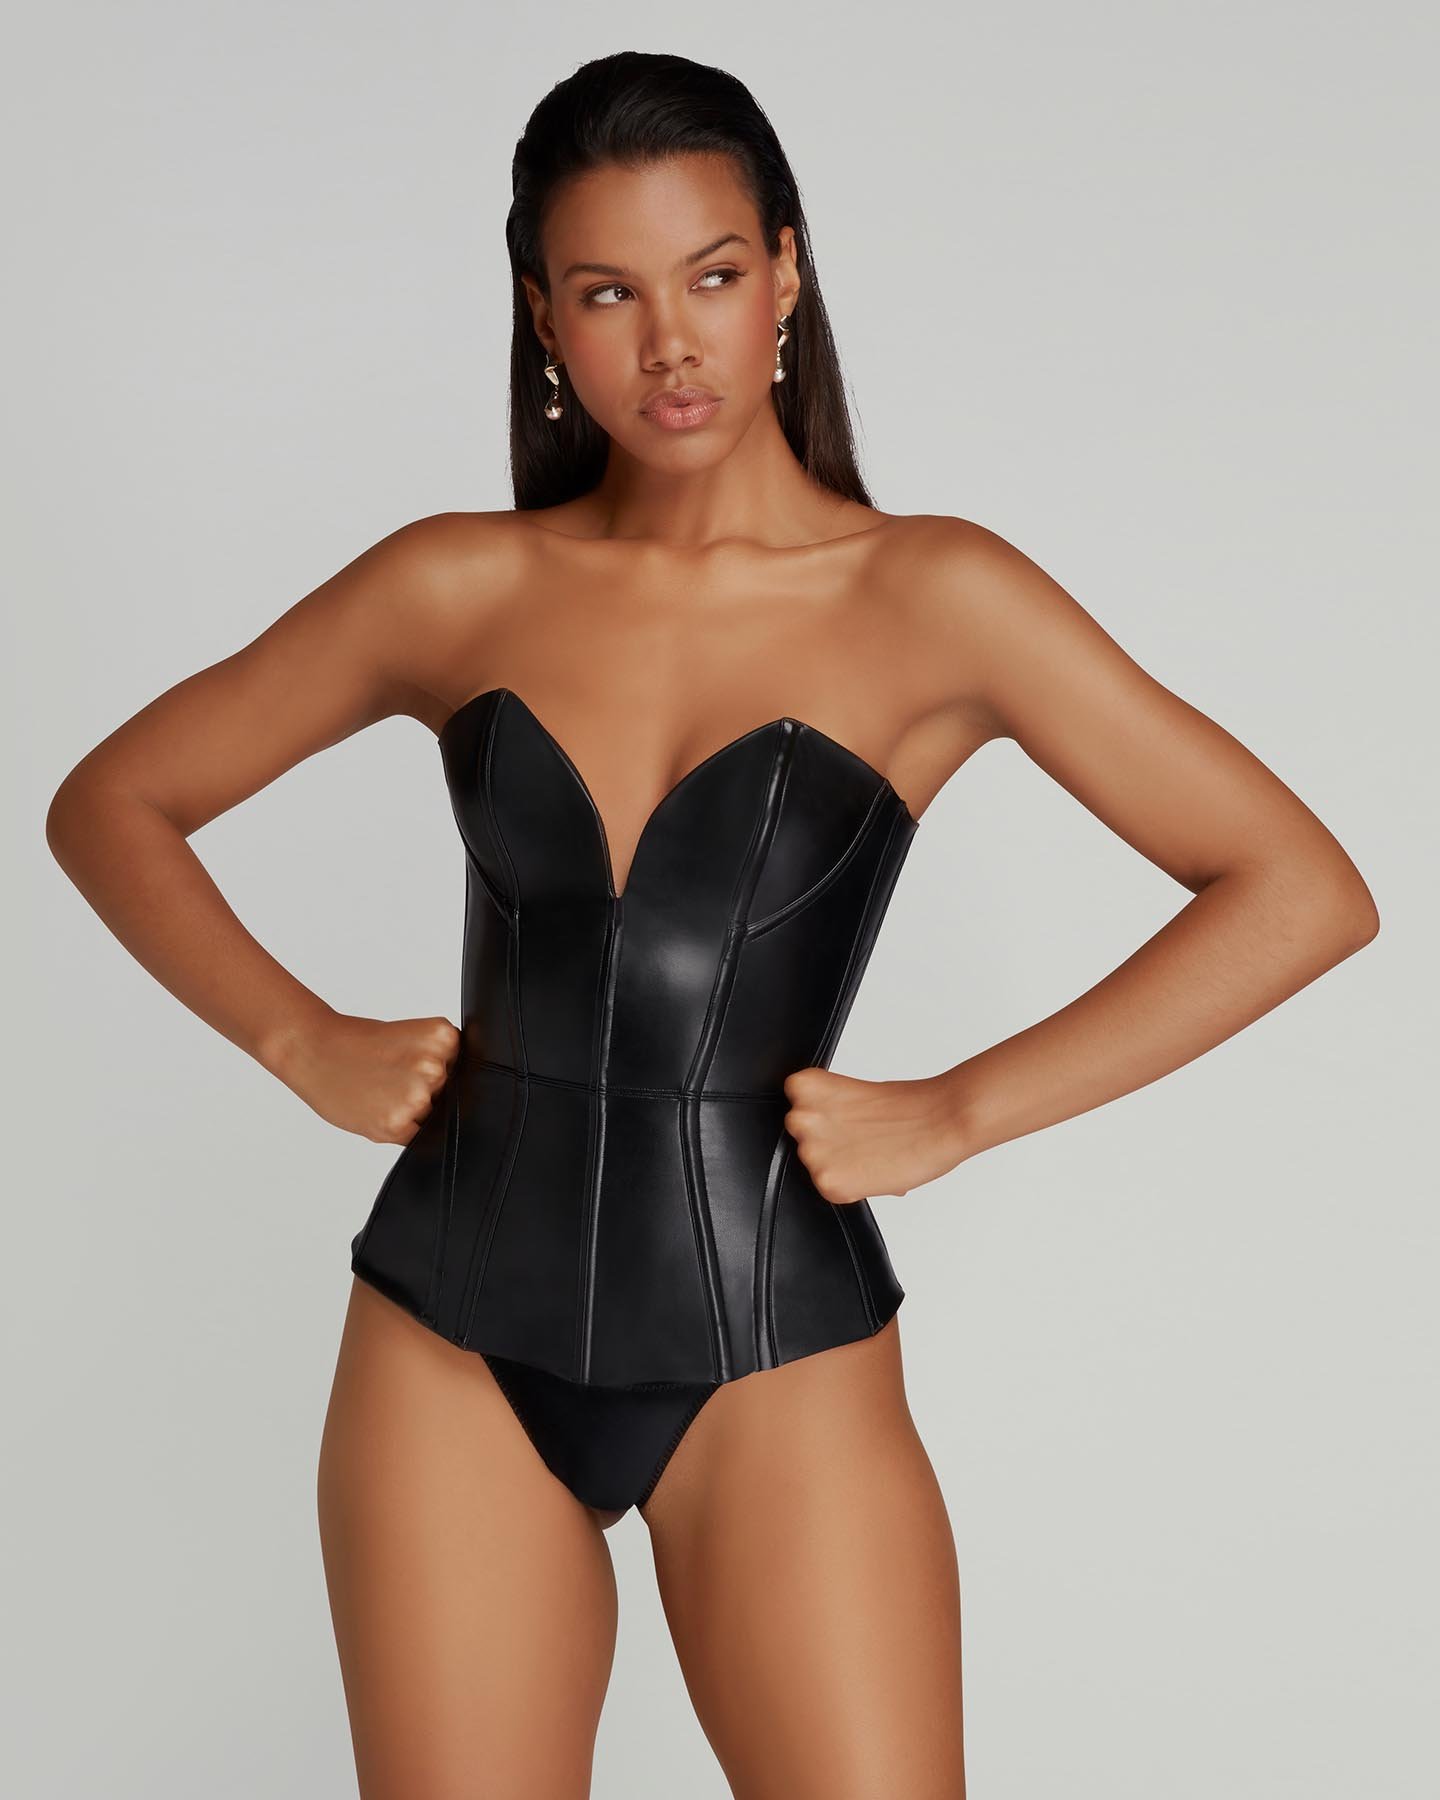 lyse ekstra Fordampe Gena Corset | By Agent Provocateur All Clothing